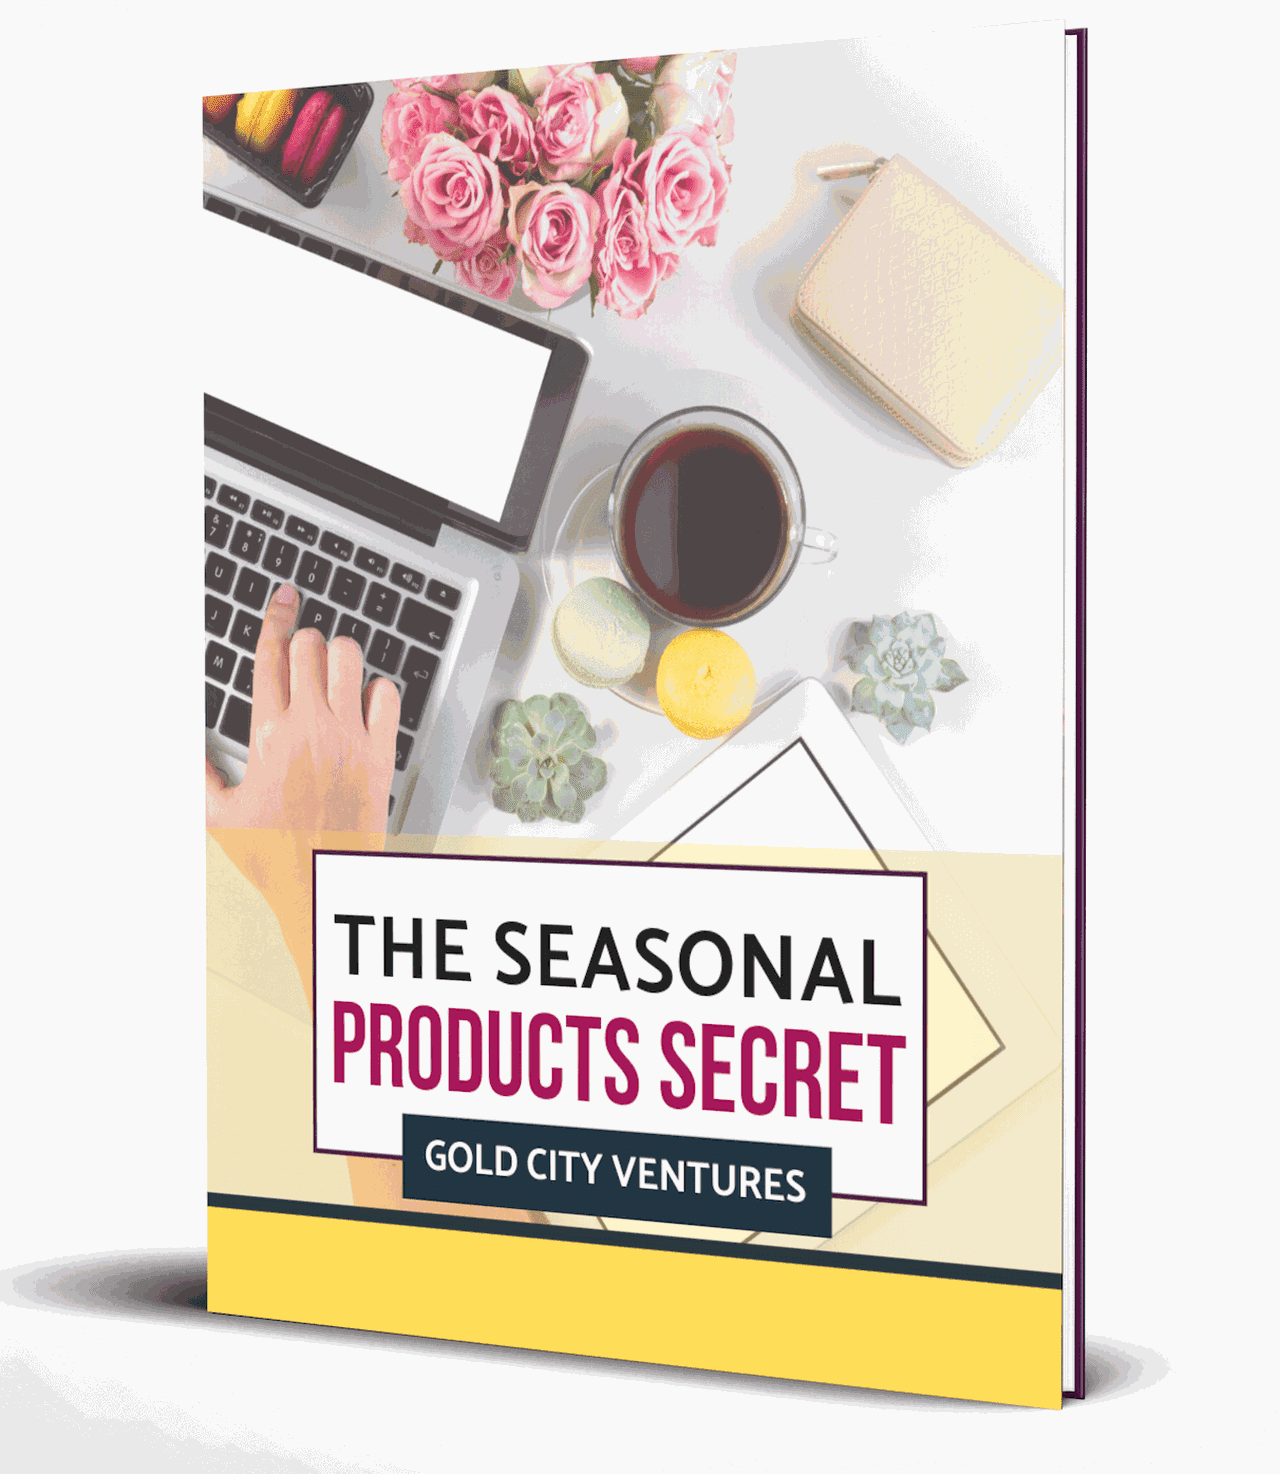 This e-book will give you a secret list of best-selling products by month and teach you how to capitalize on seasonal trends to make sales.